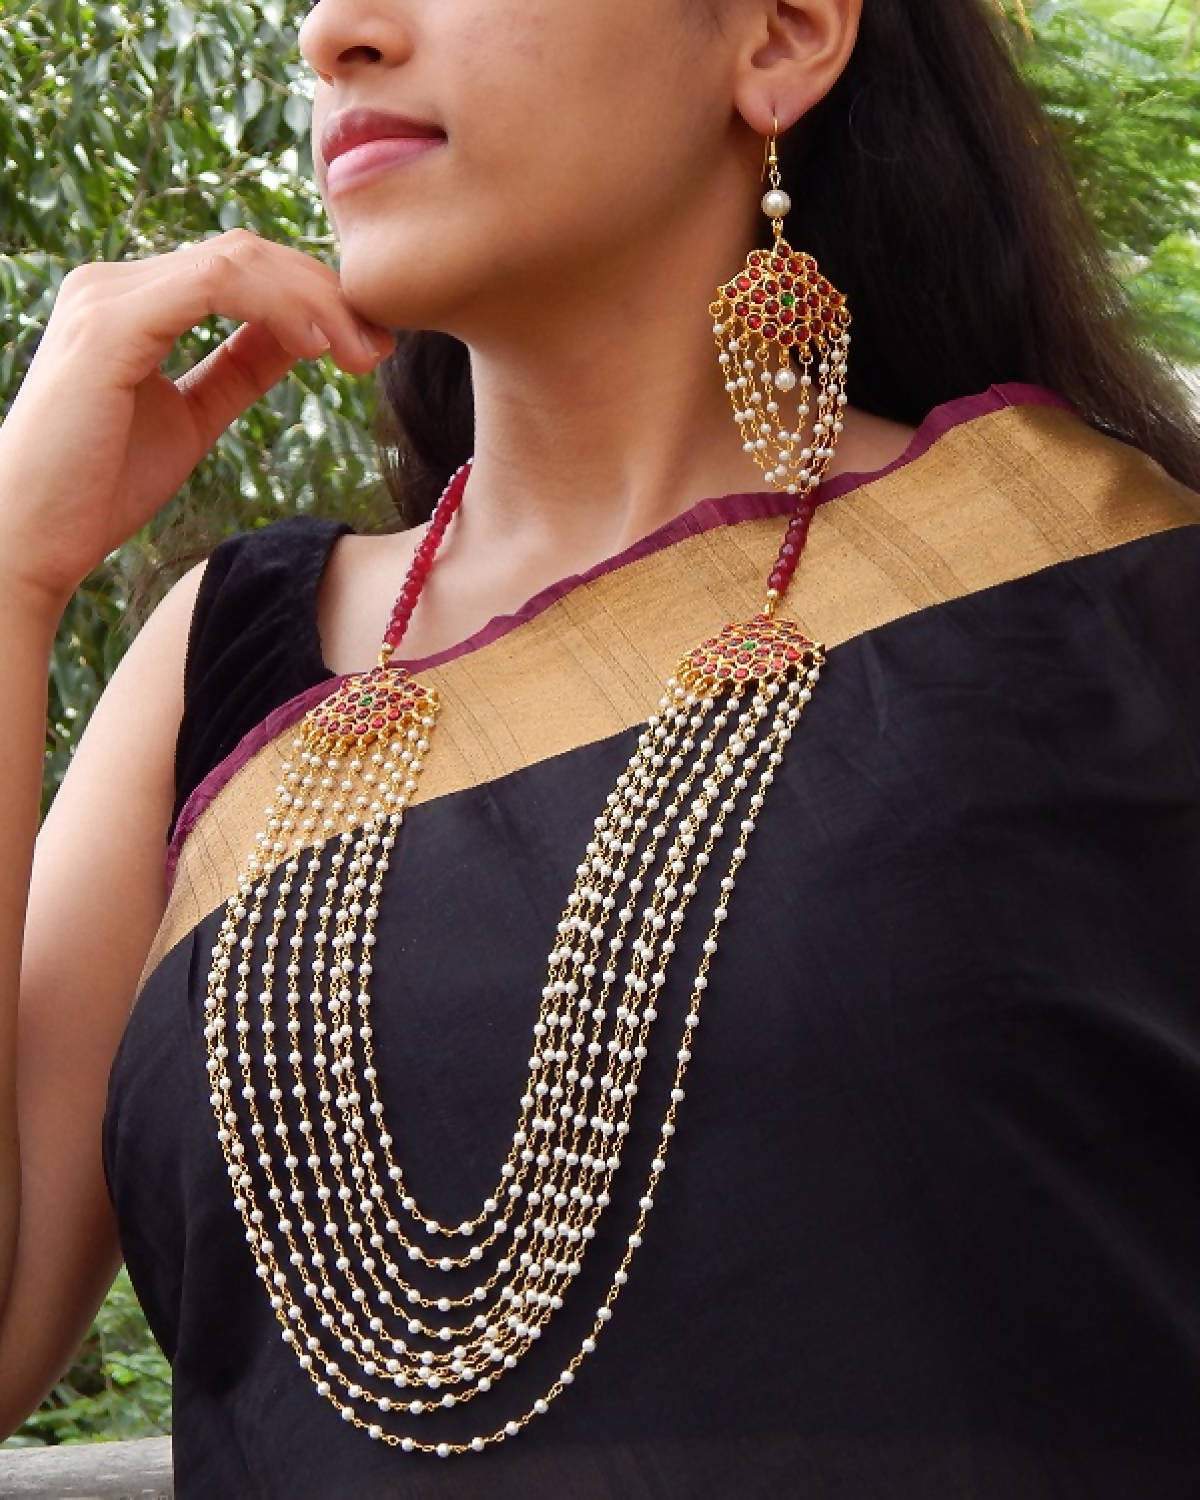 Designer Handmade Nine layer white pearl chain Maroon Kemp pendant with Maroon Agate beads Necklace Set by Nishna Designs